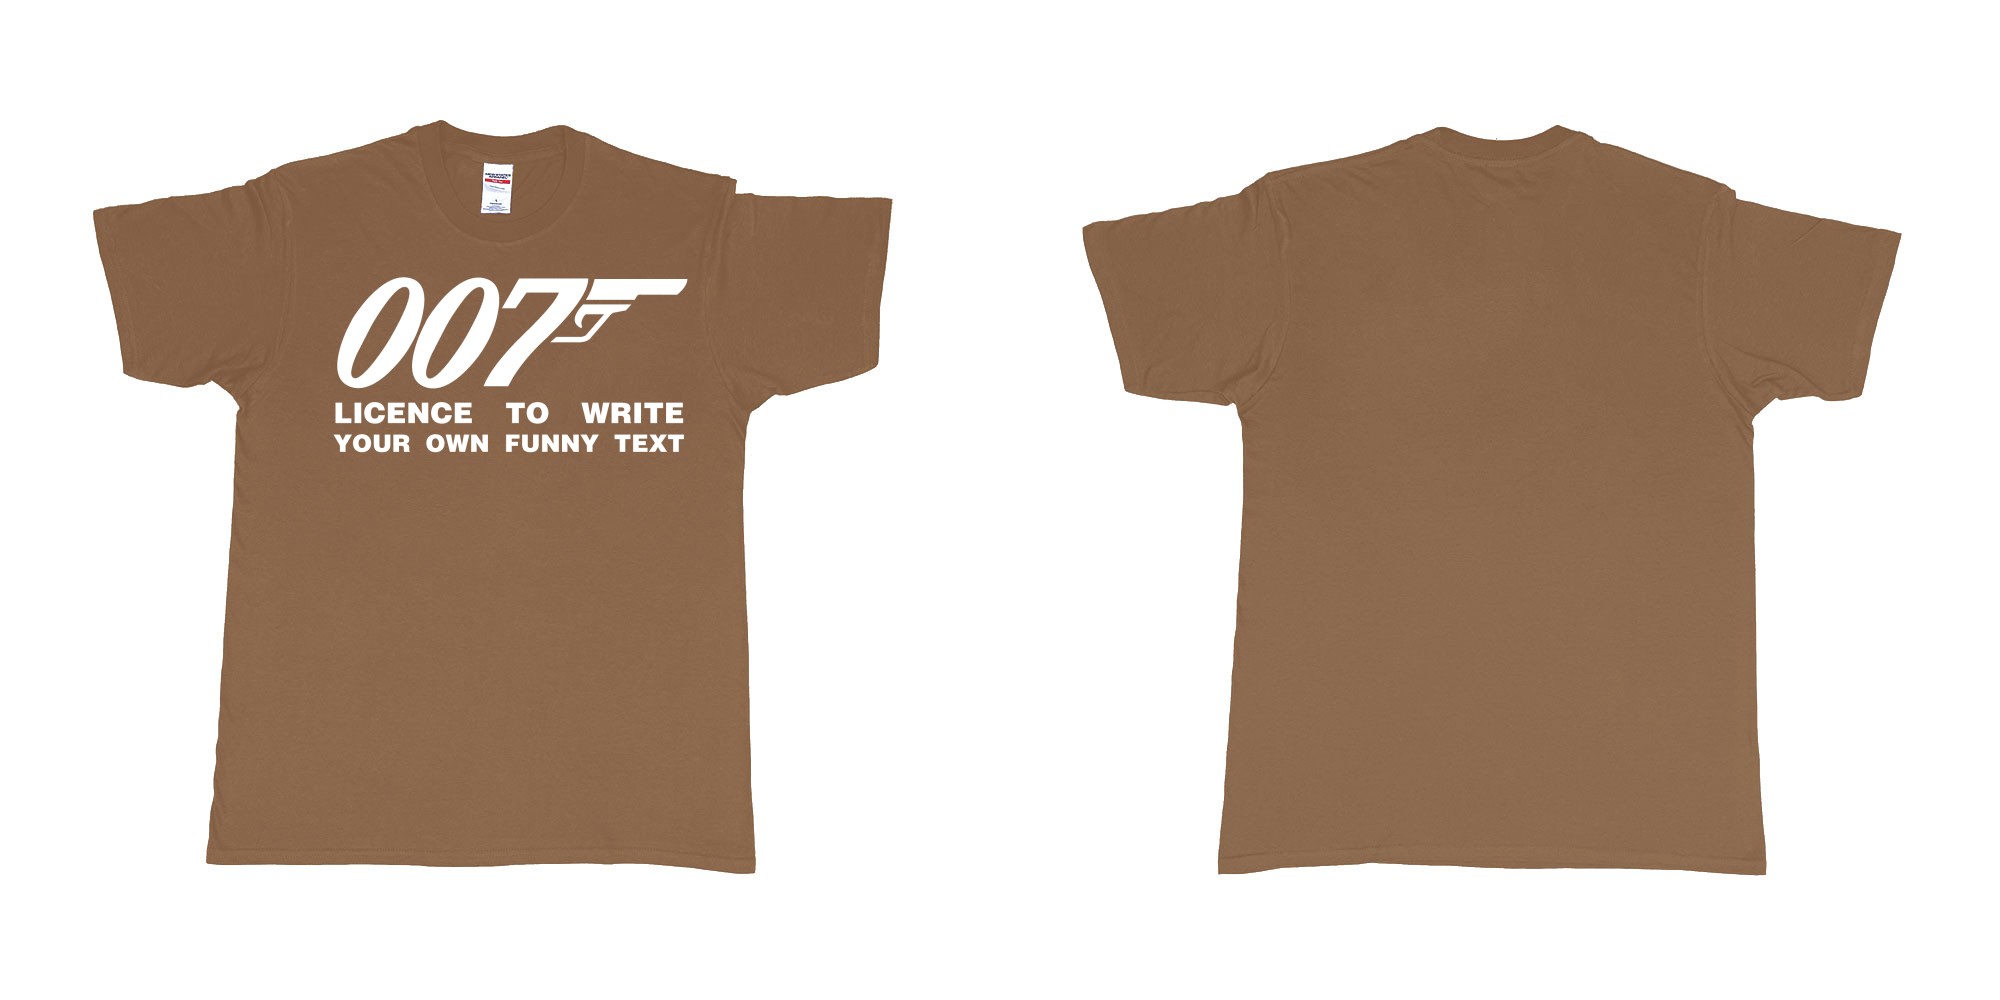 Custom tshirt design james bond logo licence to write own custom text print in fabric color chestnut choice your own text made in Bali by The Pirate Way